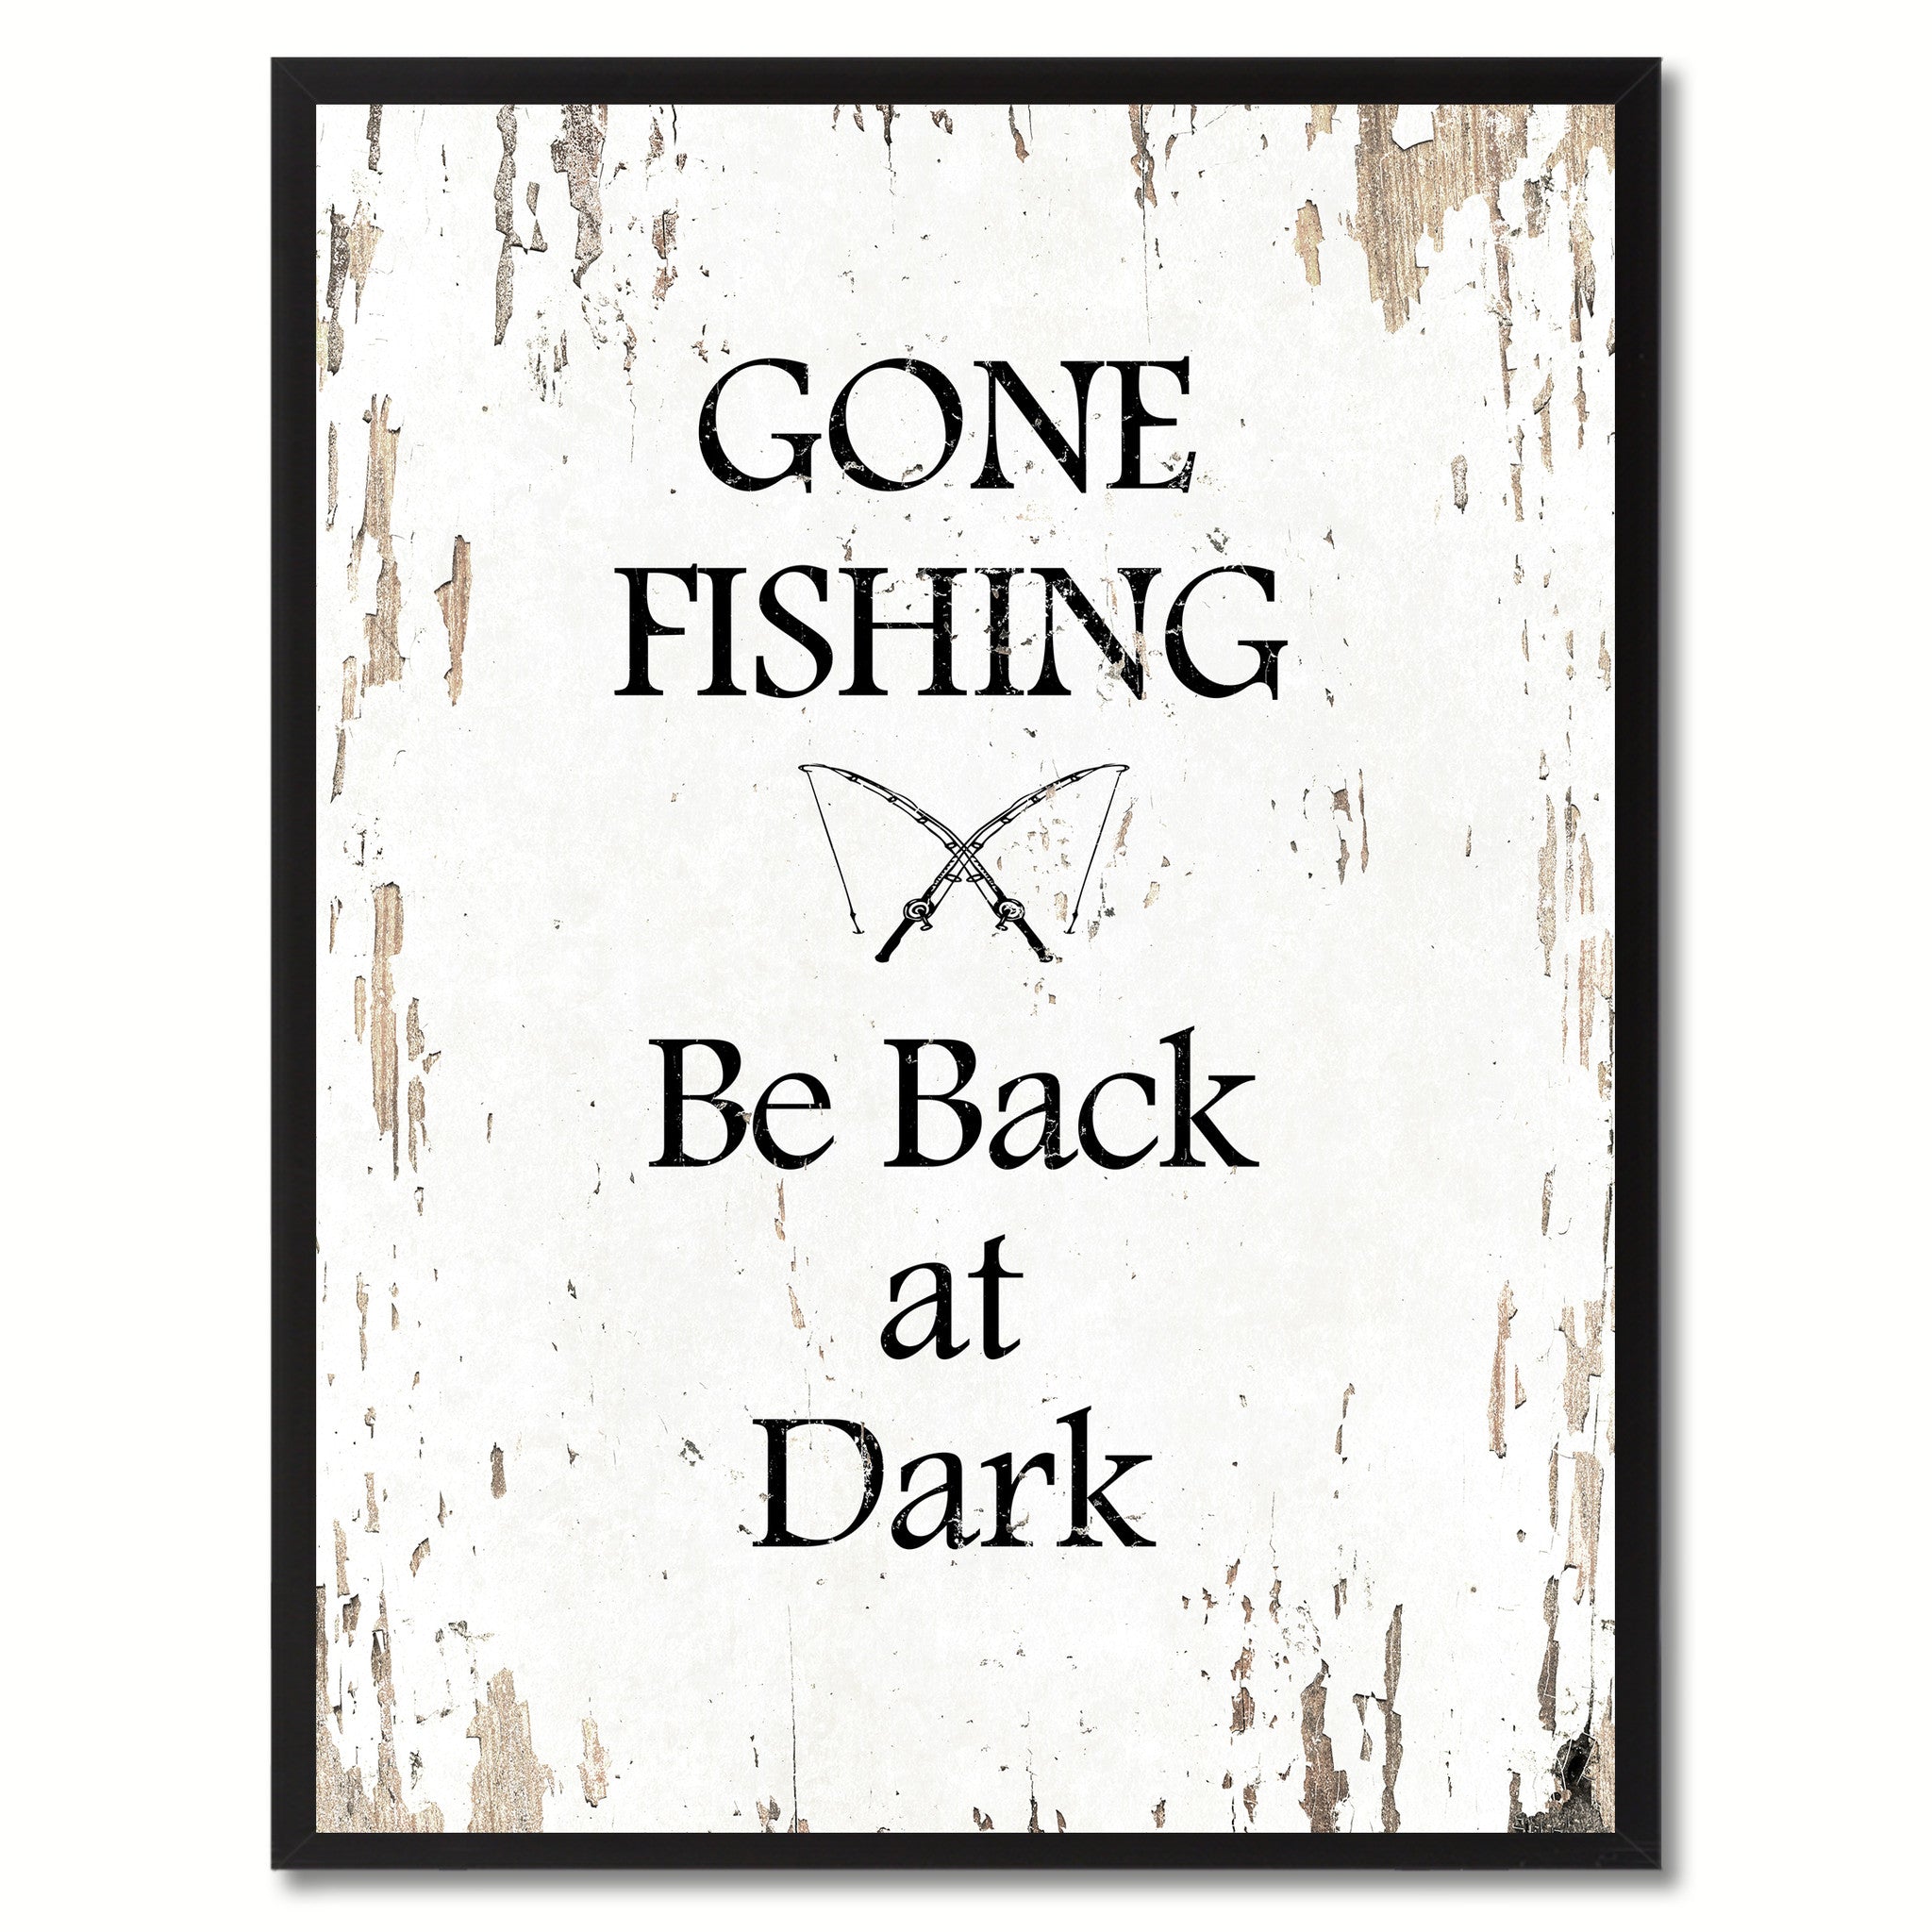 Gone fishing be back at dark  Quote Saying Gift Ideas Home Decor Wall Art